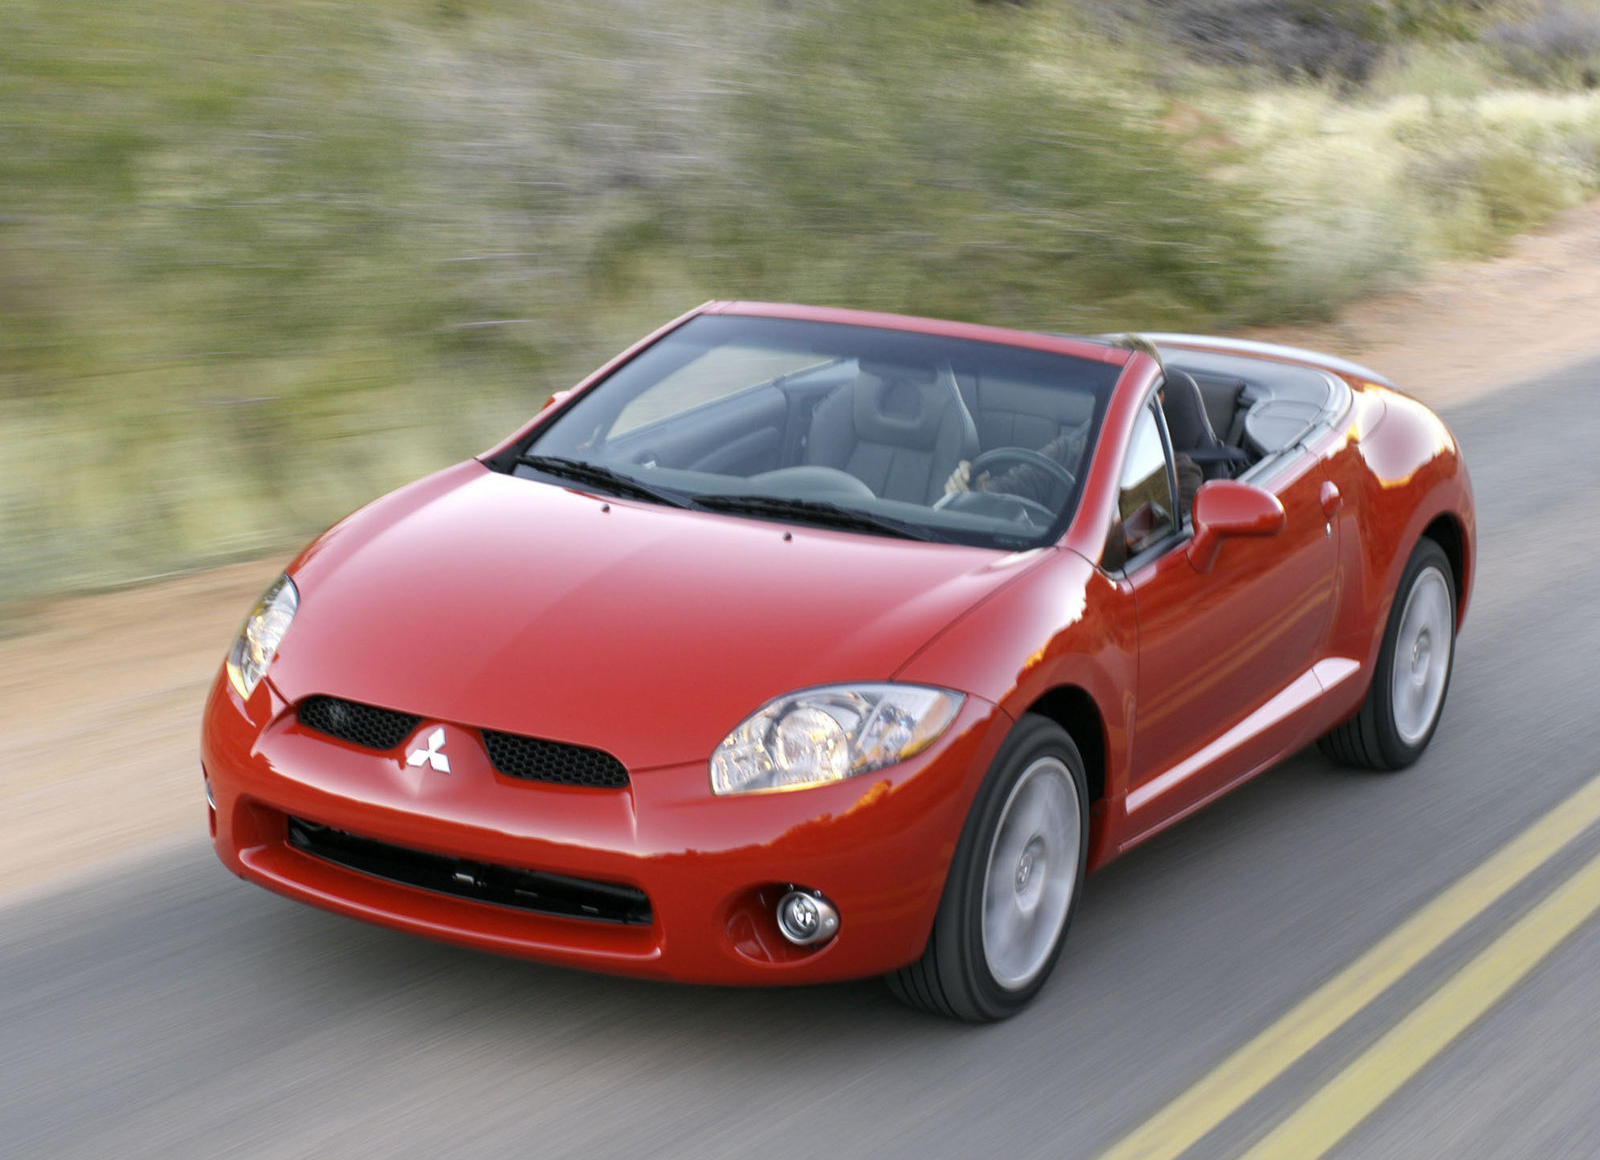 Mitsubishi Eclipse Spyder Generations: All Model Years | Carbuzz